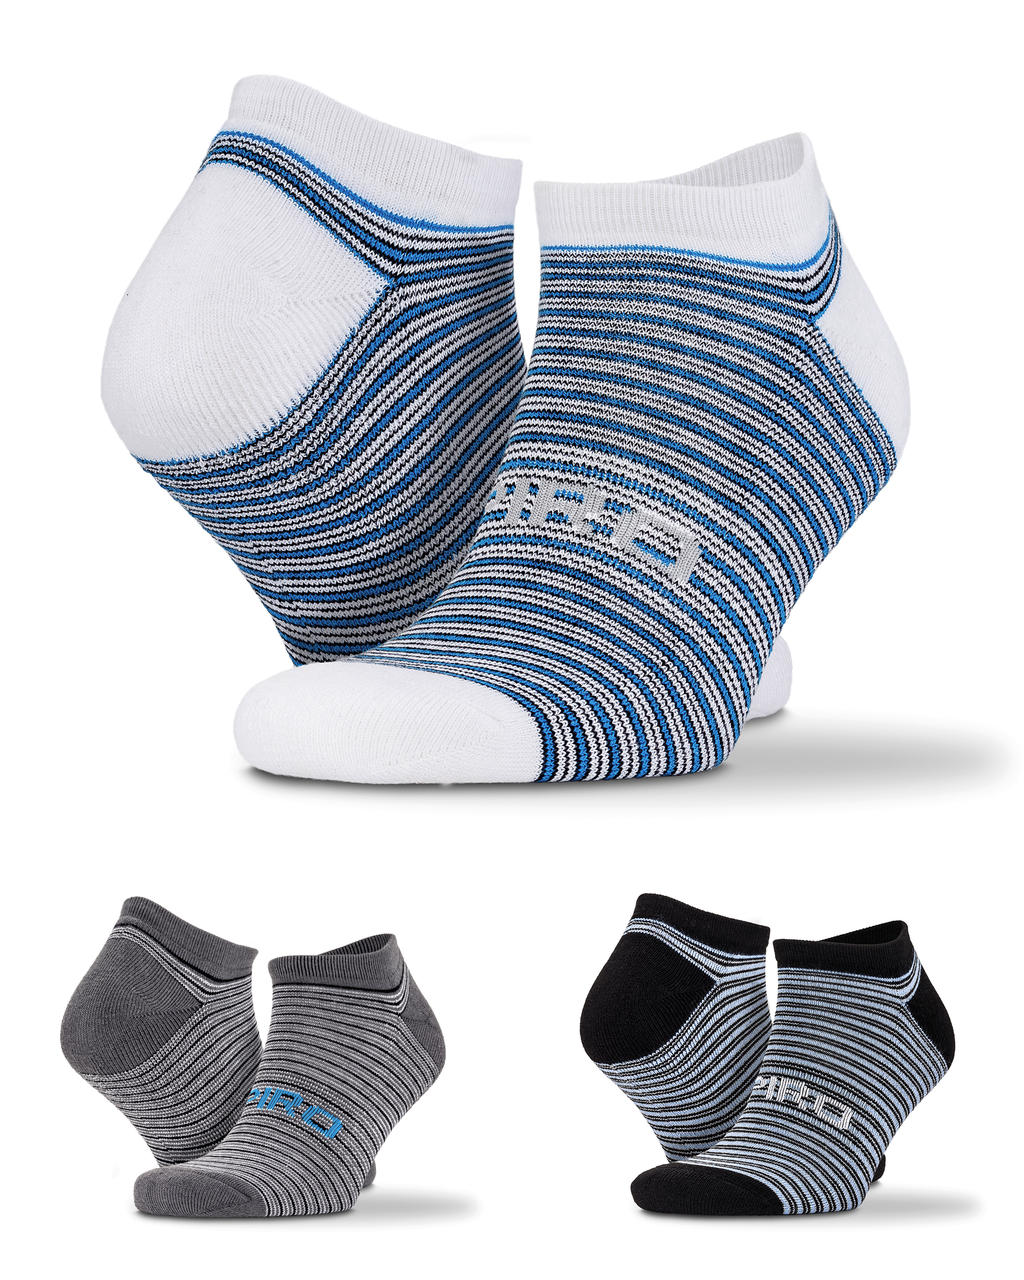  3-Pack Mixed Stripe Sneaker Socks in Farbe Color Mix 2